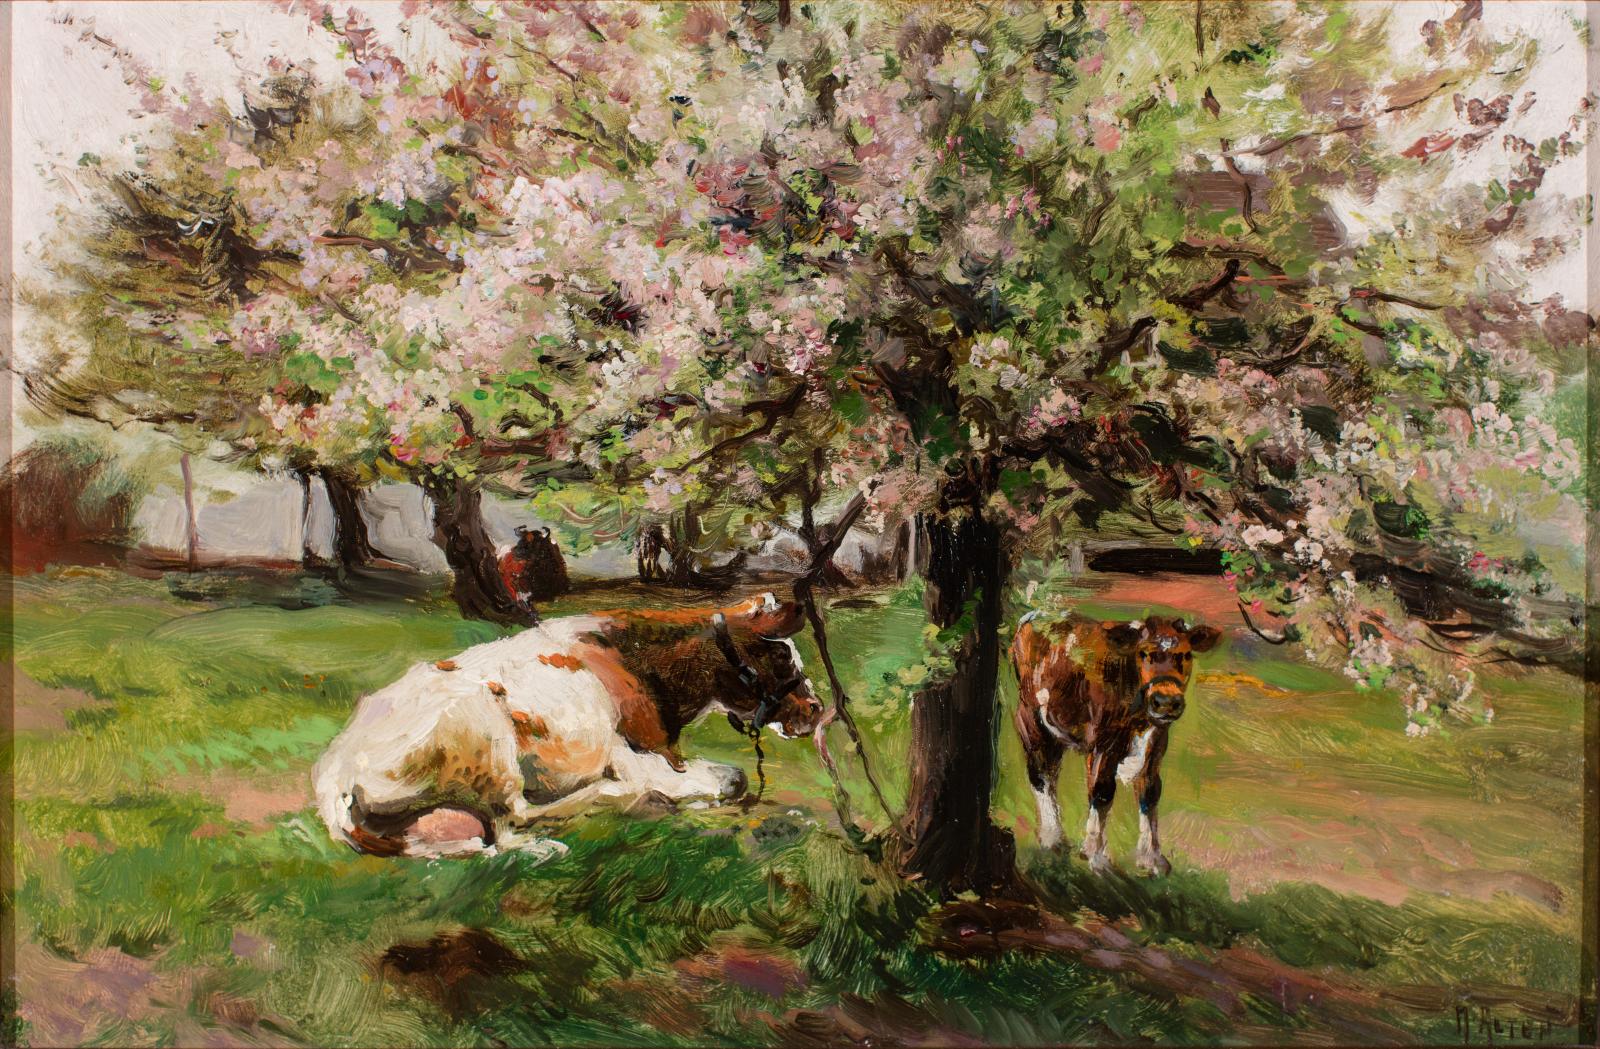 One cow lying down and a calf standing under a tree blooming with pink flowers.